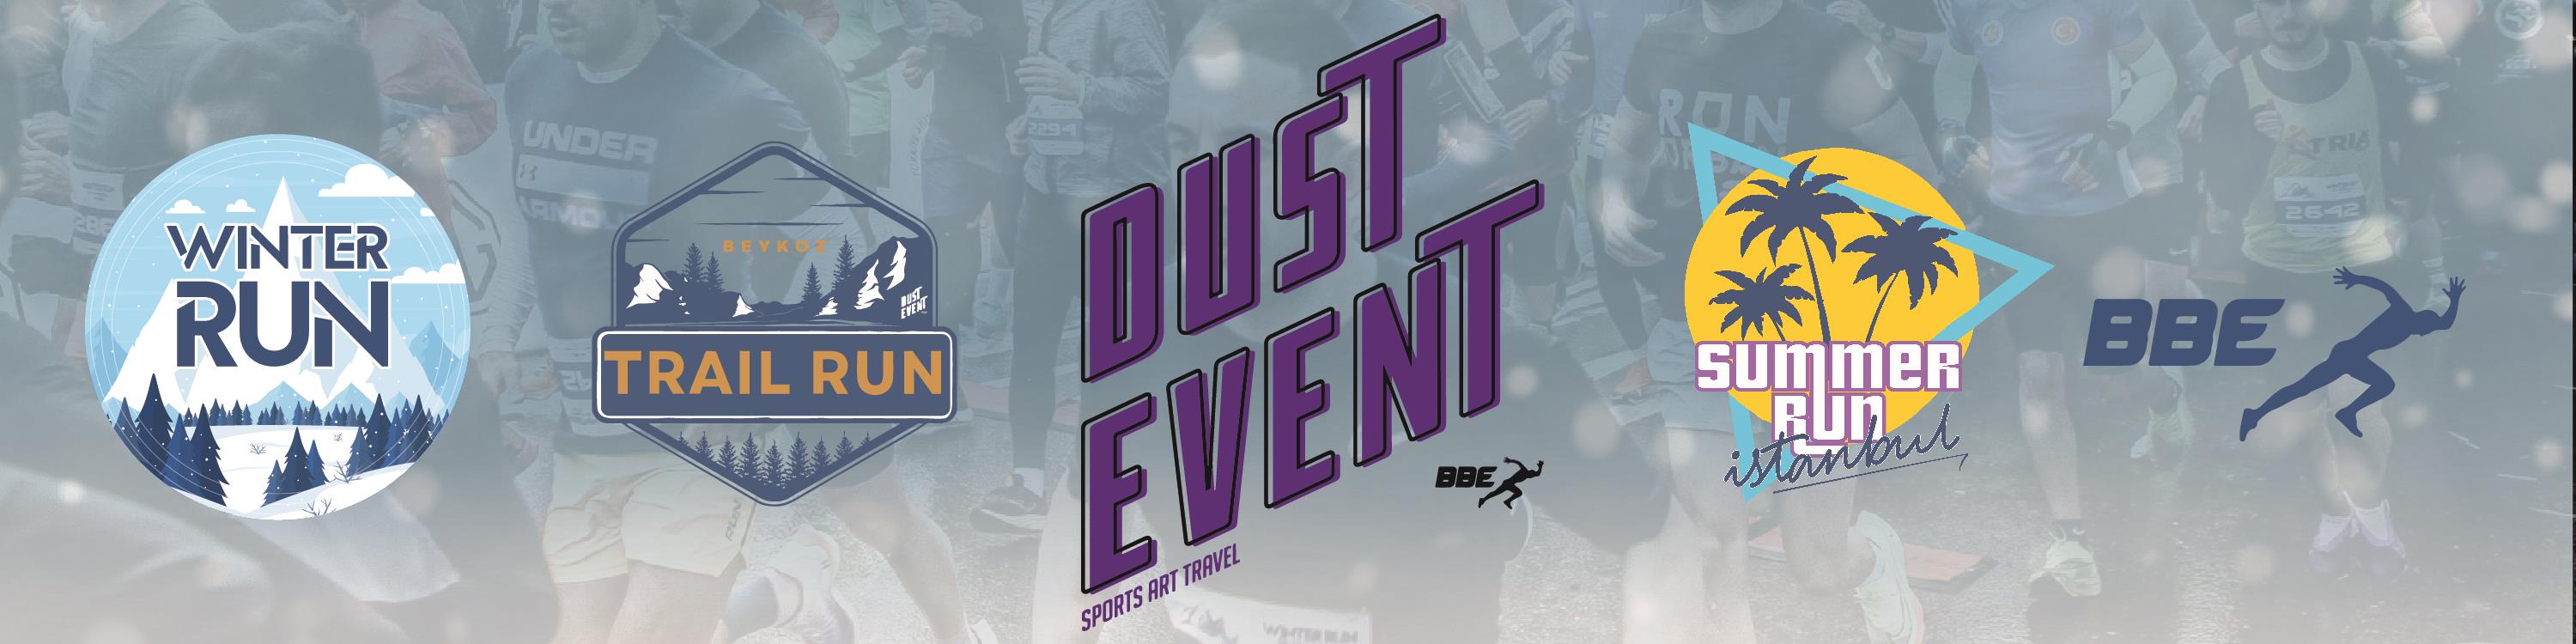 Dust Event